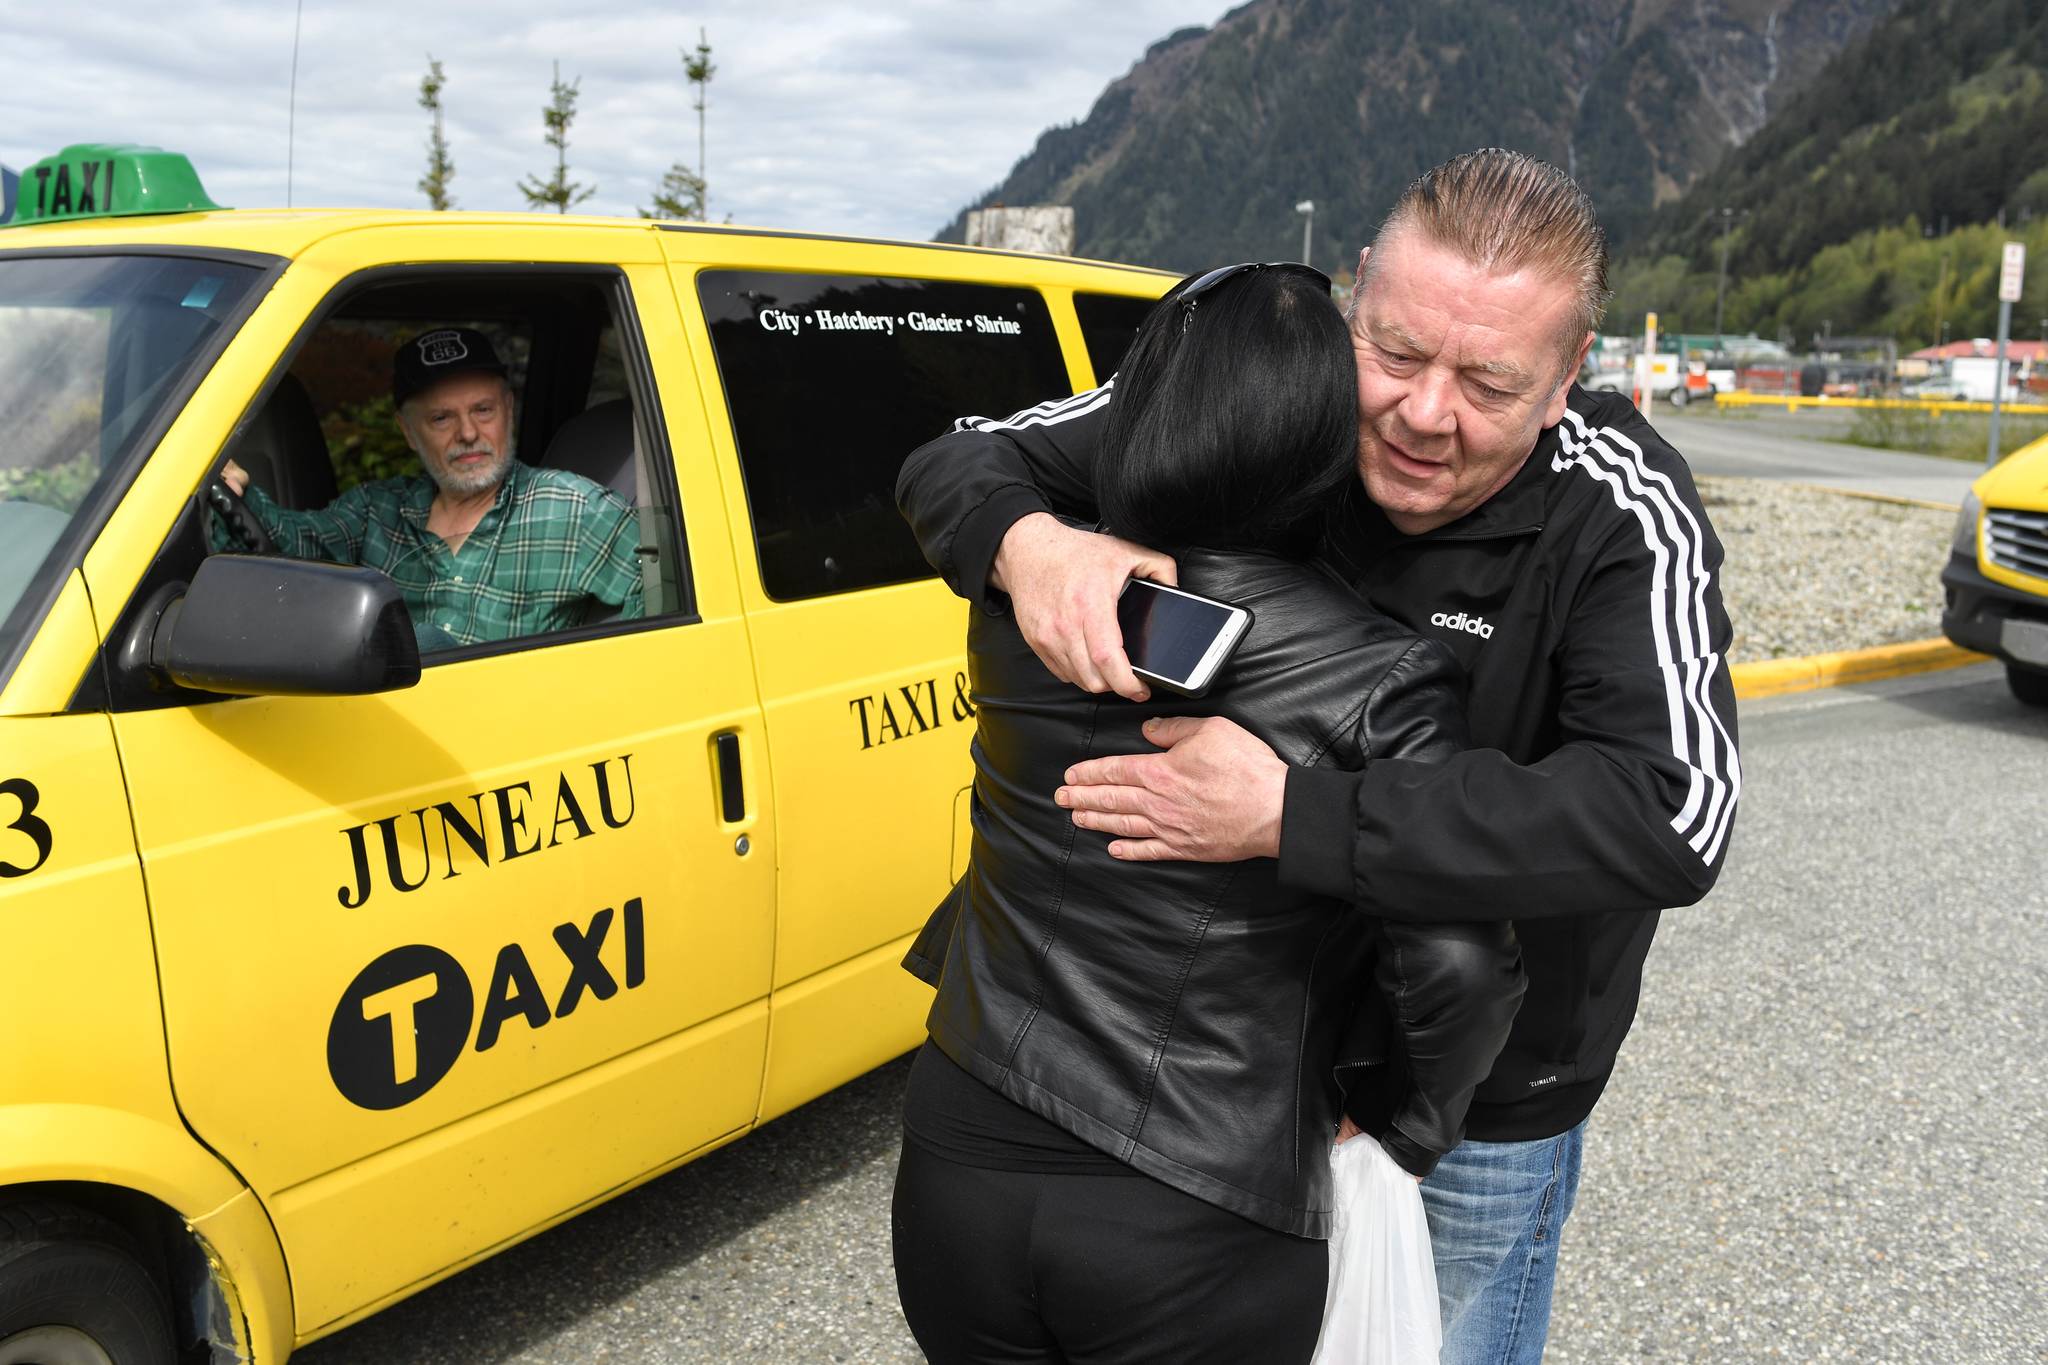 Taxi driver George O’Malley gives Monica Campbell a hug as Tony Schandler looks on before Juneau taxi drivers parade through downtown Juneau in honor of Scott Campbell on Friday, May 10, 2019. (Michael Penn | Juneau Empire)